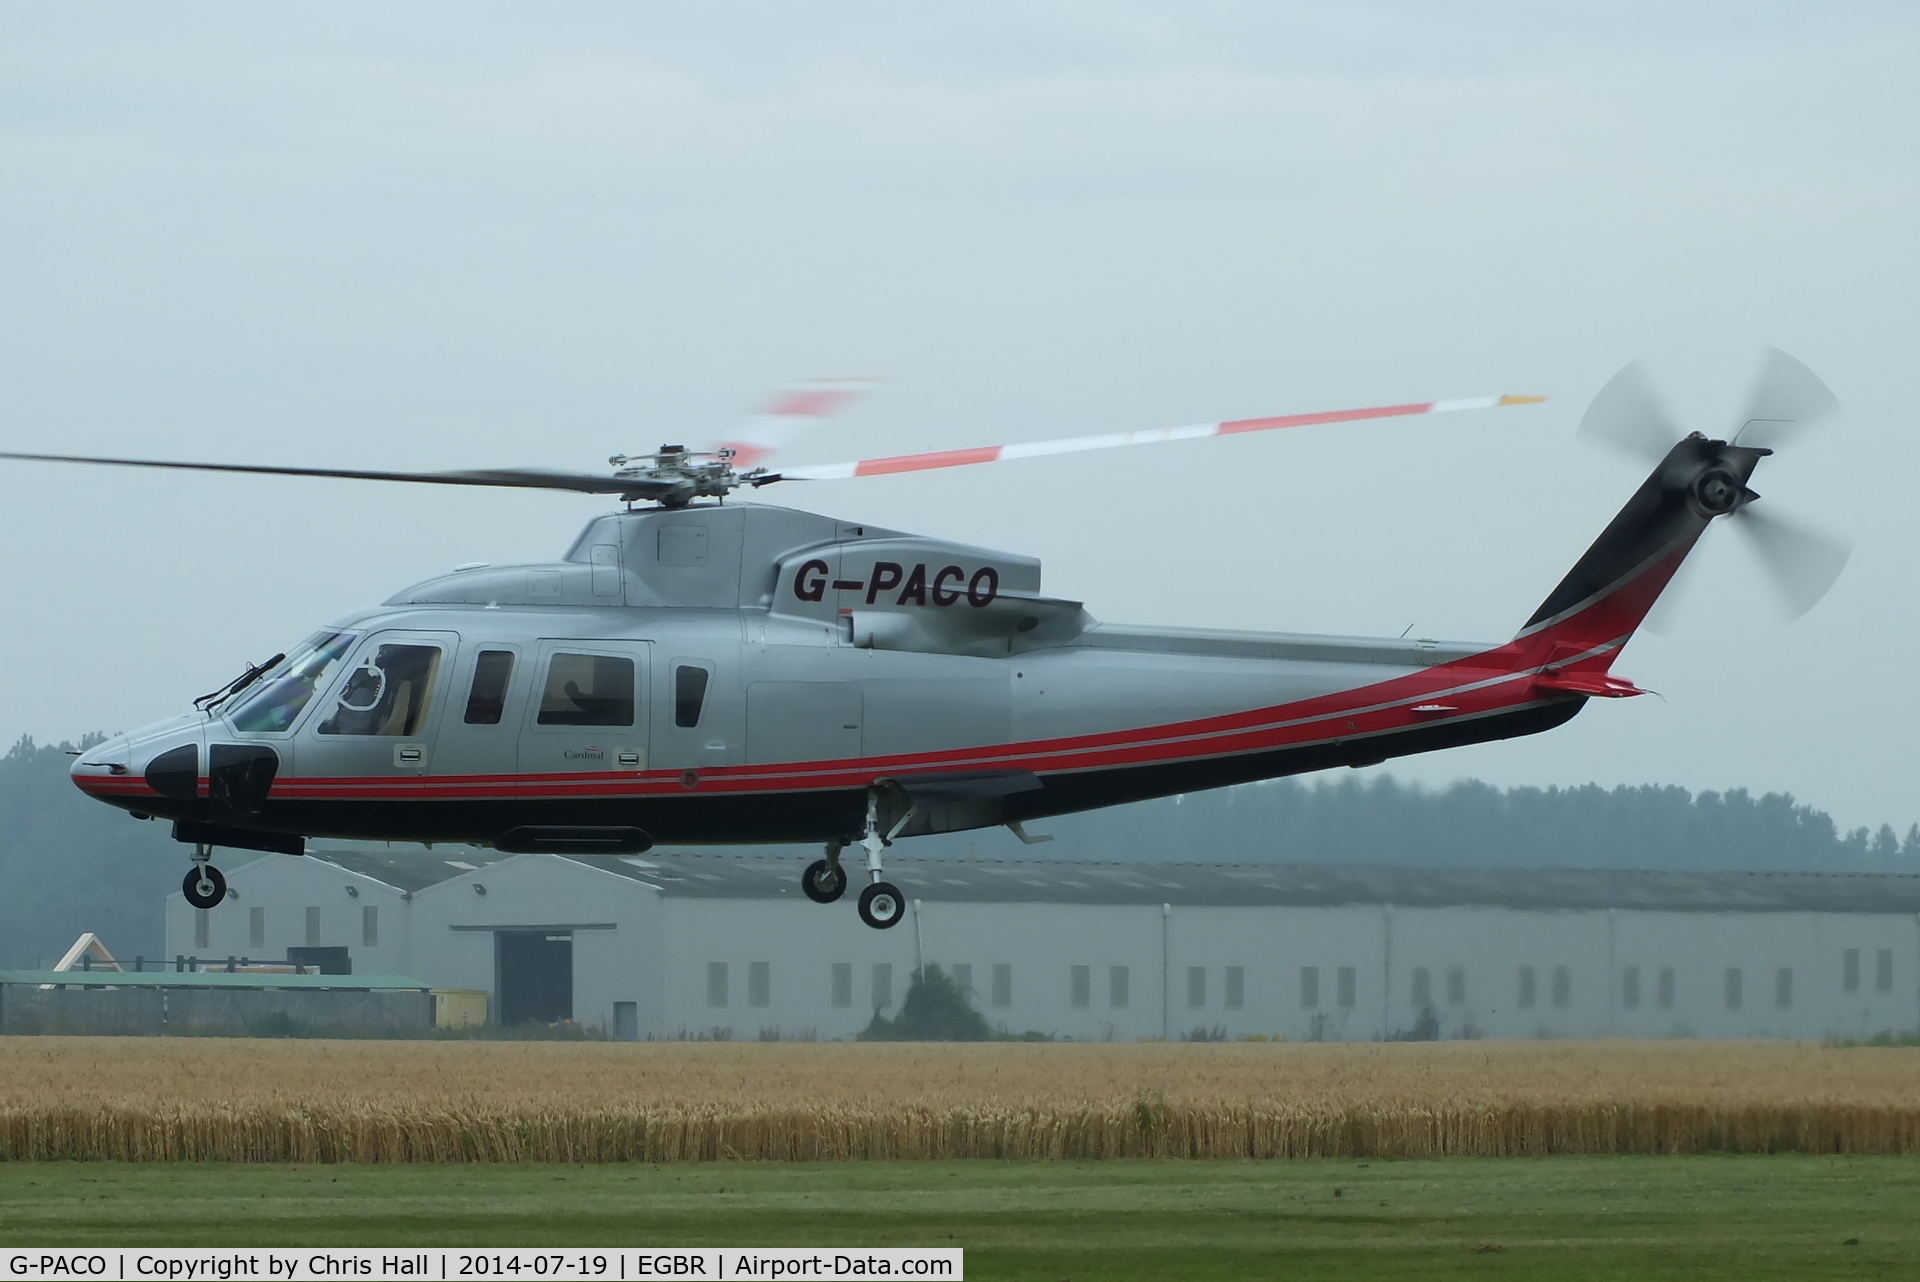 G-PACO, 2009 Sikorsky S-76C C/N 760782, Cardinal Helicopter Services (IOM) Ltd